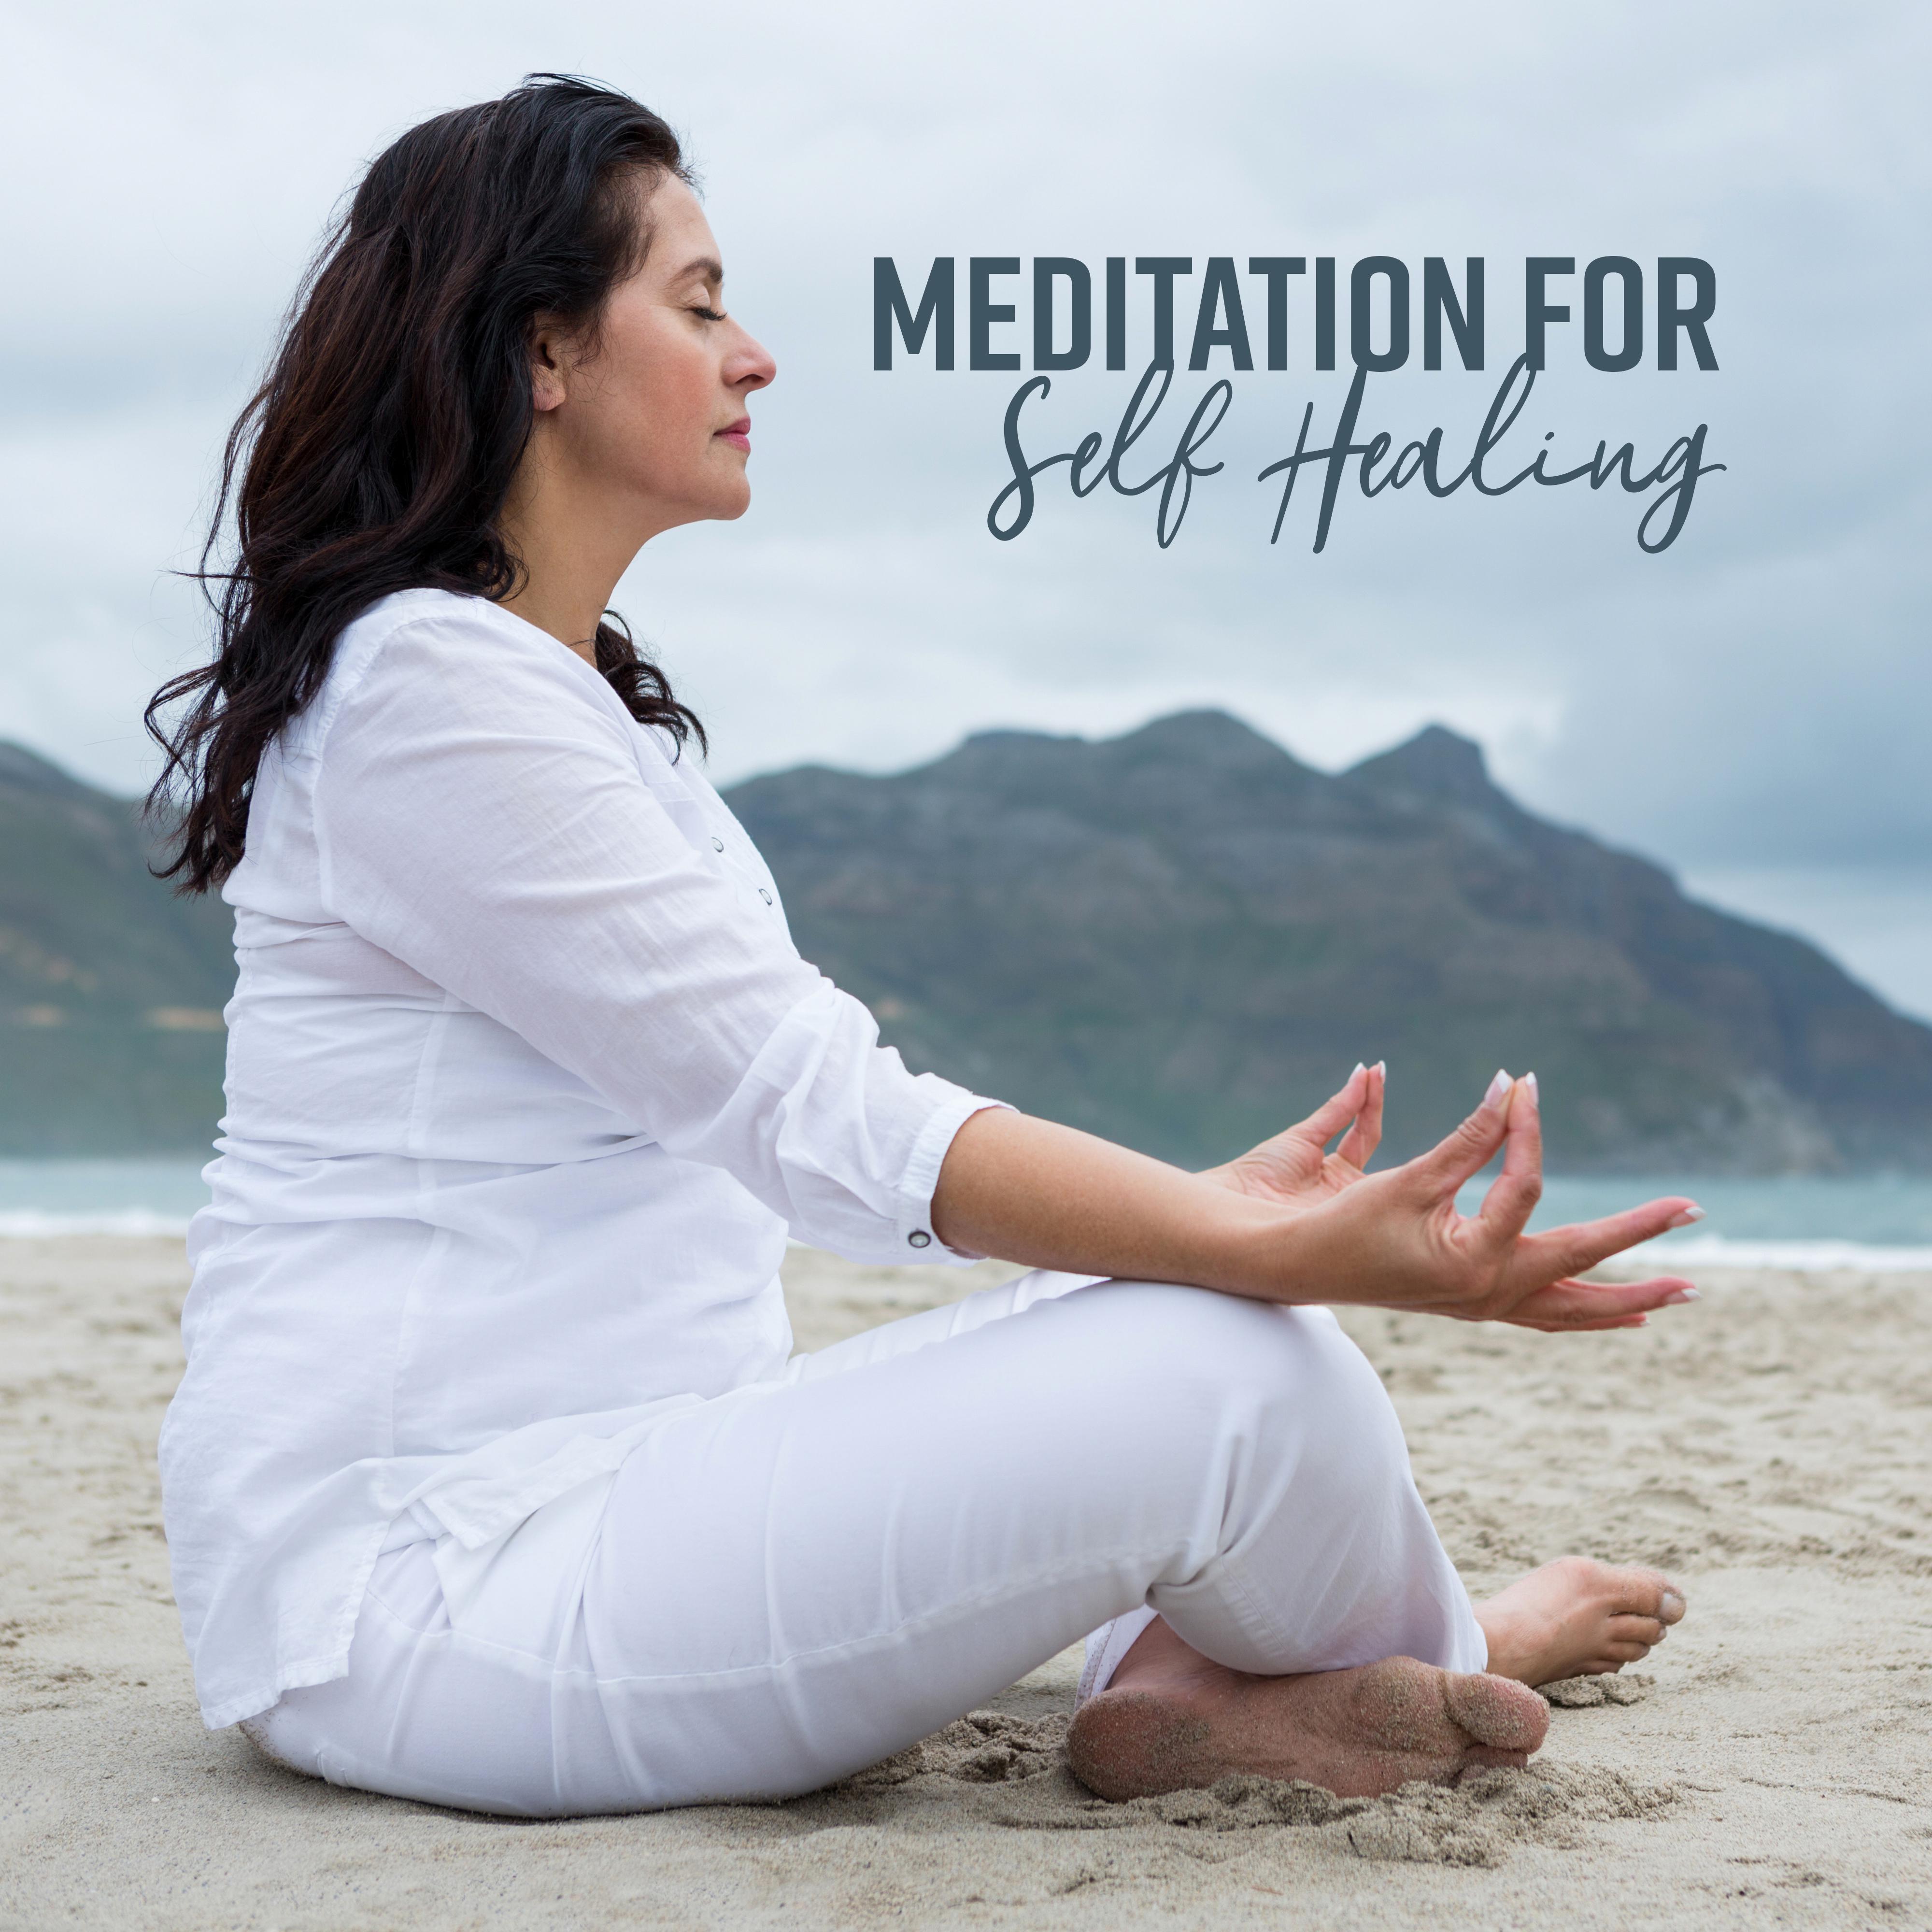 Meditation for Self Healing: New Age Compilation 2019 Music for Yoga & Healing Relaxation, Vital Energy Increase, Body & Soul Connection Improve